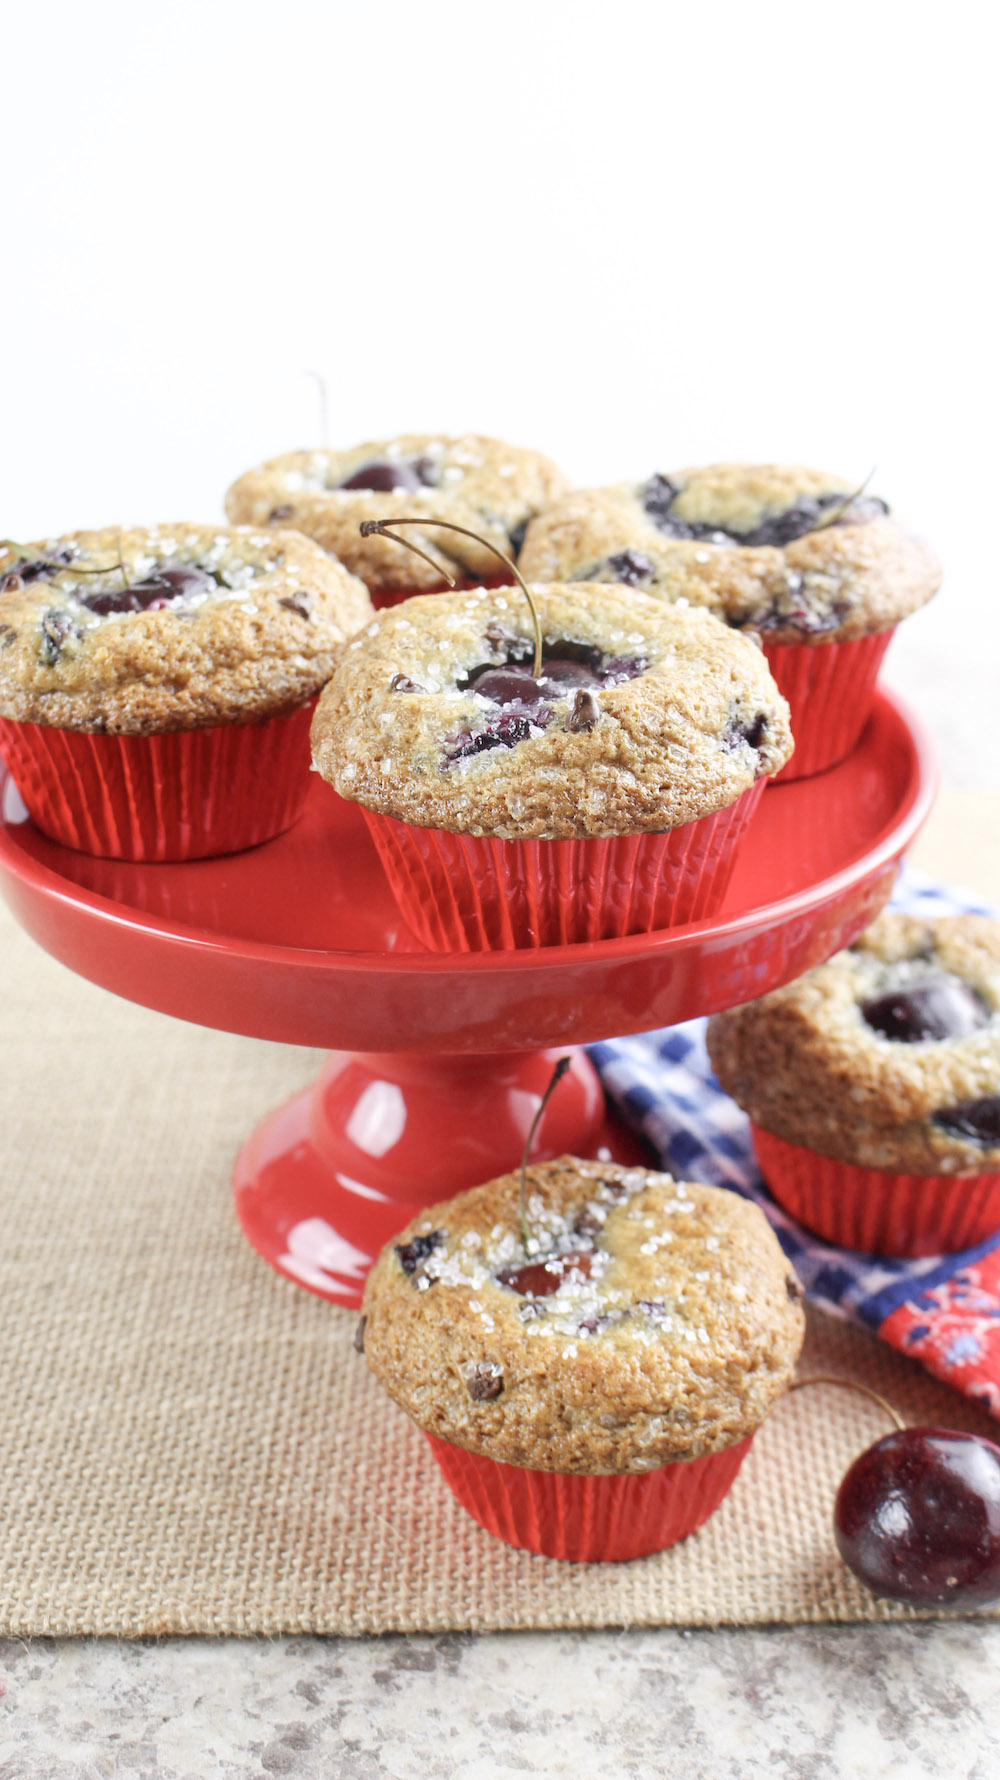 I needed a more decadent breakfast--a dessert for breakfast. And this recipe for Cherry Chocolate Muffins made all my dessert-breakfast dreams come true!